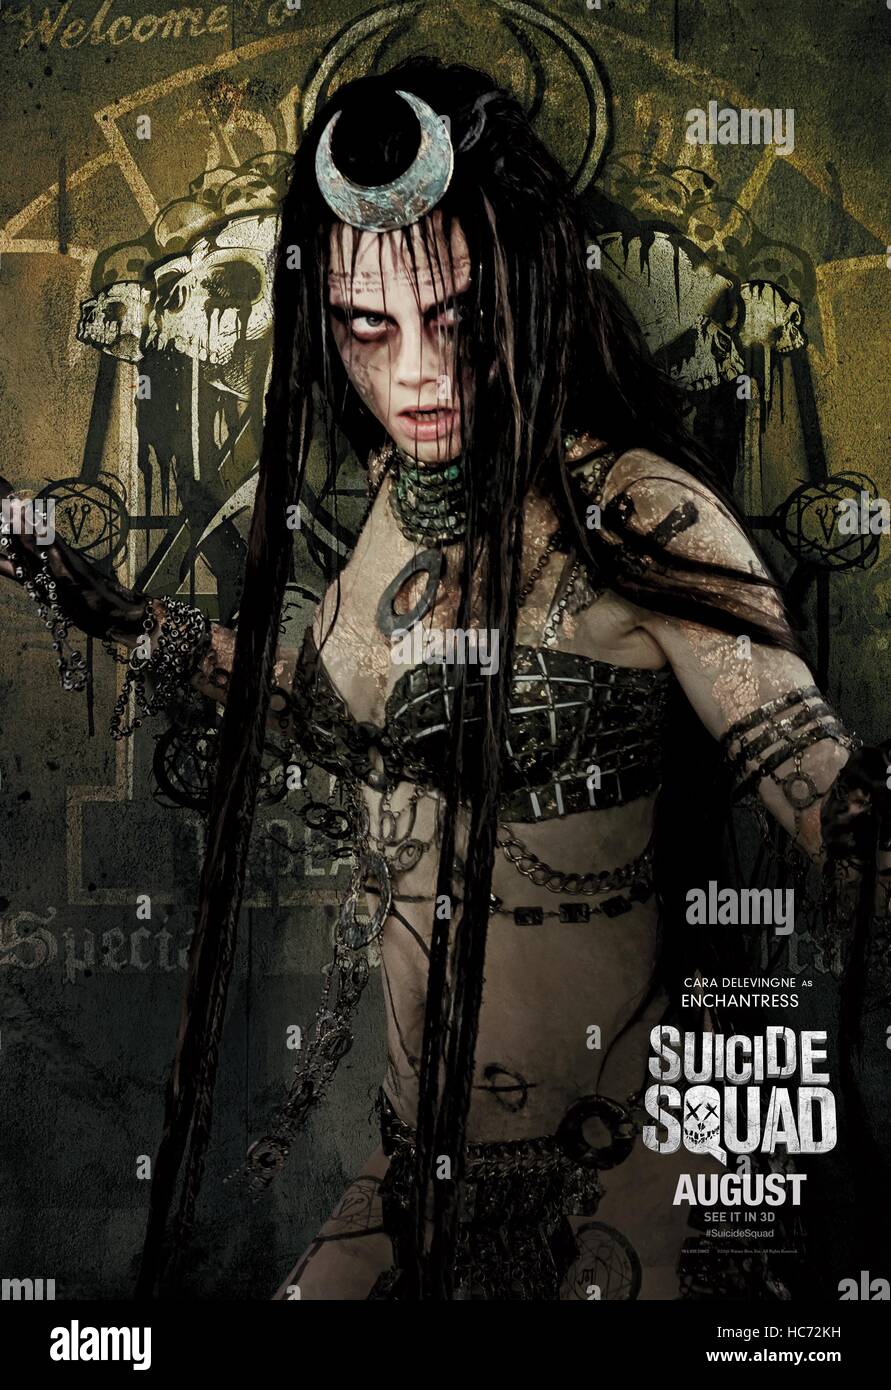 RELEASE DATE: August 5, 2016 TITLE: Suicide Squad STUDIO: Atlas Entertainment DIRECTOR: David Ayer PLOT: A secret government agency recruits imprisoned supervillains to execute dangerous black ops missions in exchange for clemency STARRING: Cara Delevingne as June Moone / Enchantress (Credit Image: c Atlas Entertainment/Entertainment Pictures/) Stock Photo